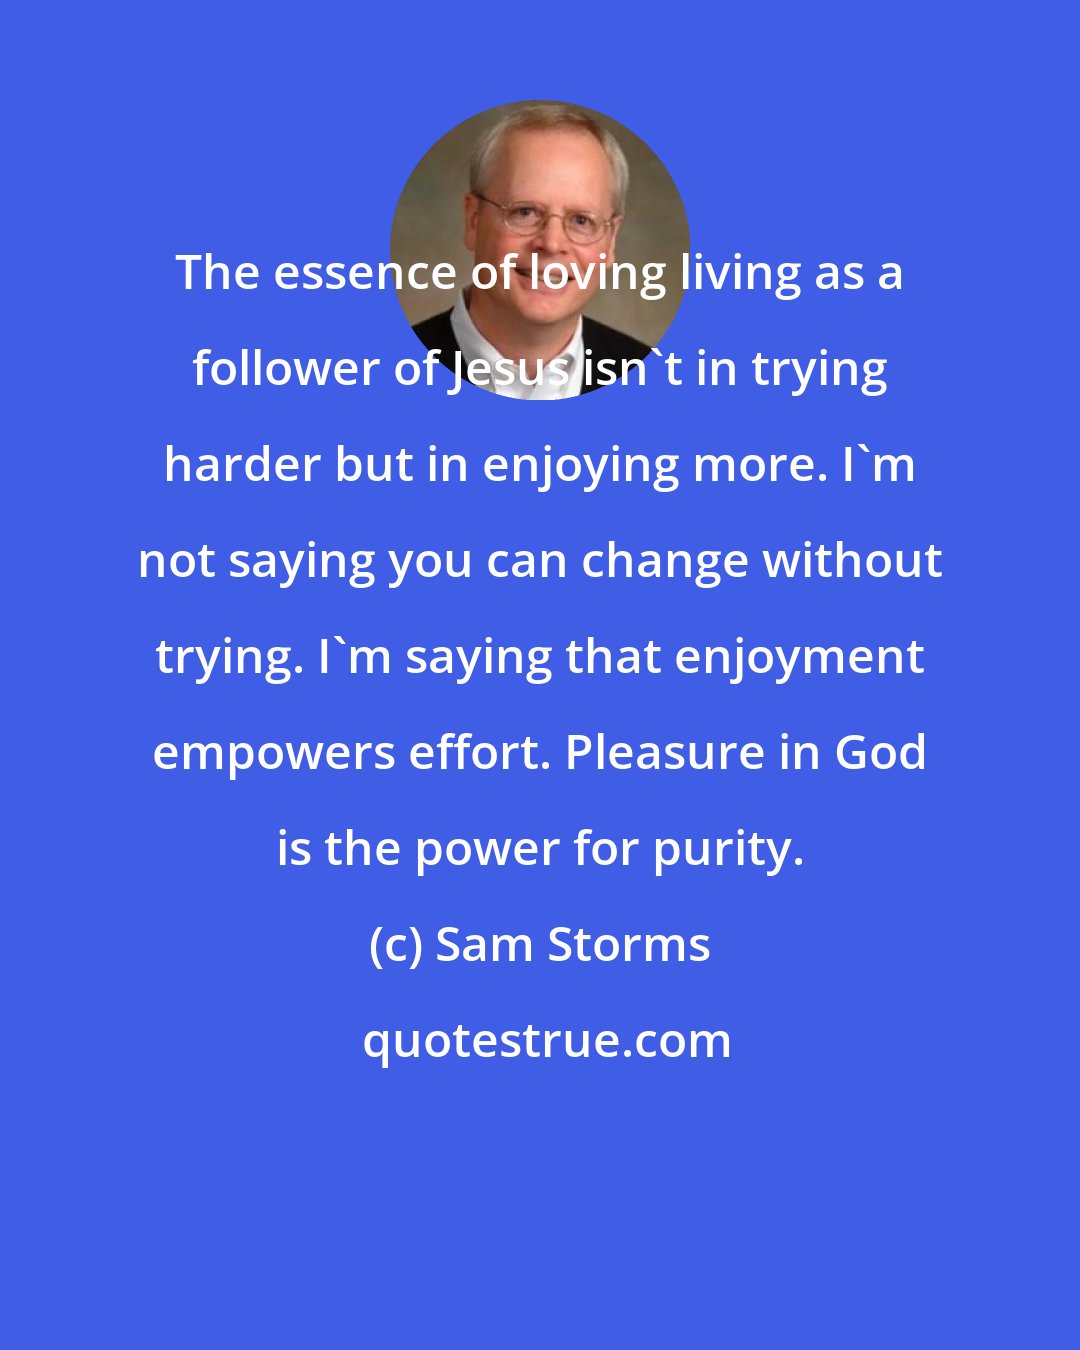 Sam Storms: The essence of loving living as a follower of Jesus isn't in trying harder but in enjoying more. I'm not saying you can change without trying. I'm saying that enjoyment empowers effort. Pleasure in God is the power for purity.